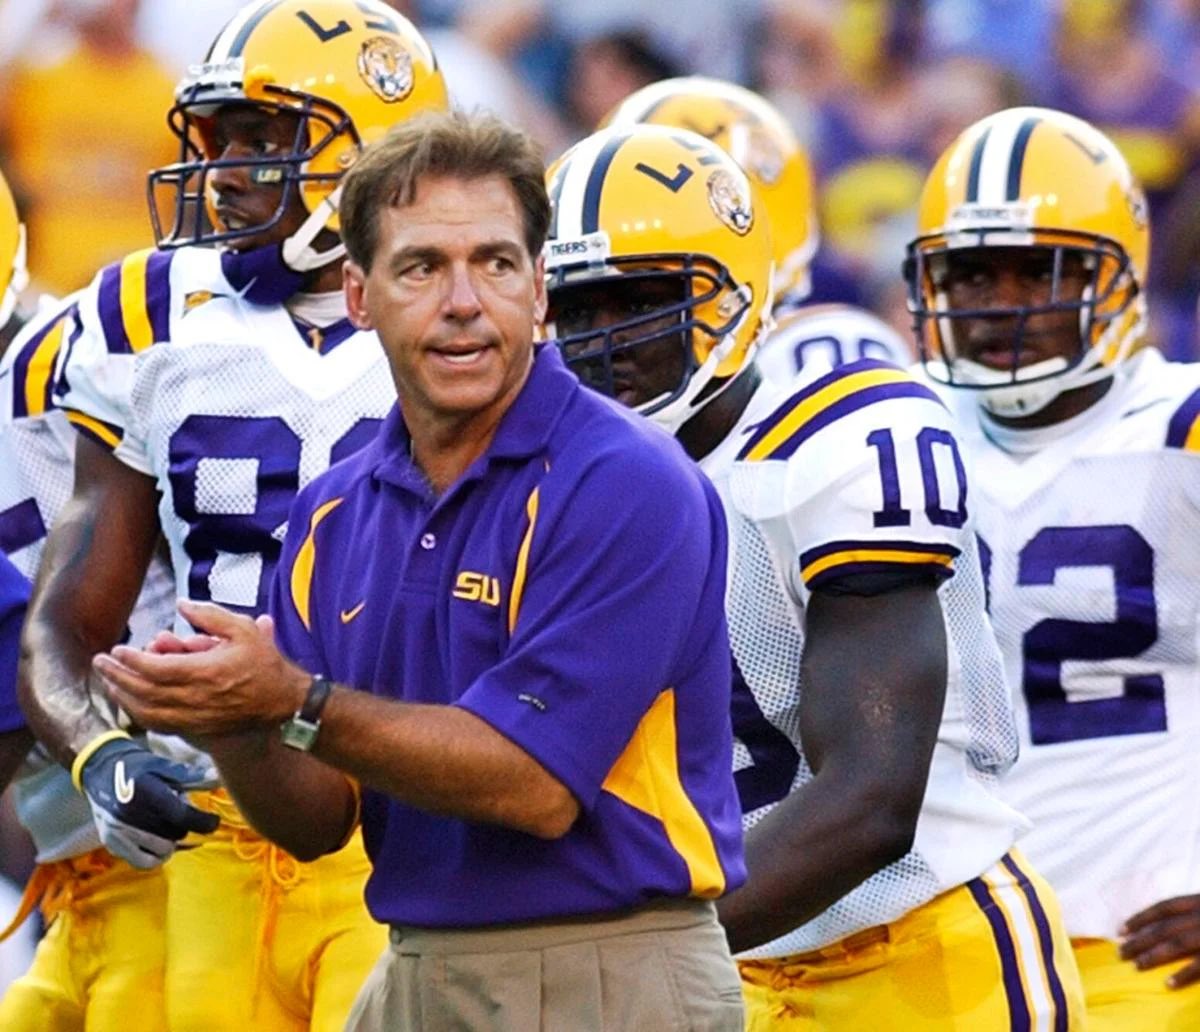 Feel however you want to feel about him, but Nick Saban is the greatest head coach in CFB history. And although he’s put #LSU fans through hell since going to Alabama, he’s the one that woke up the sleeping giant that is #LSU football. 🫡.